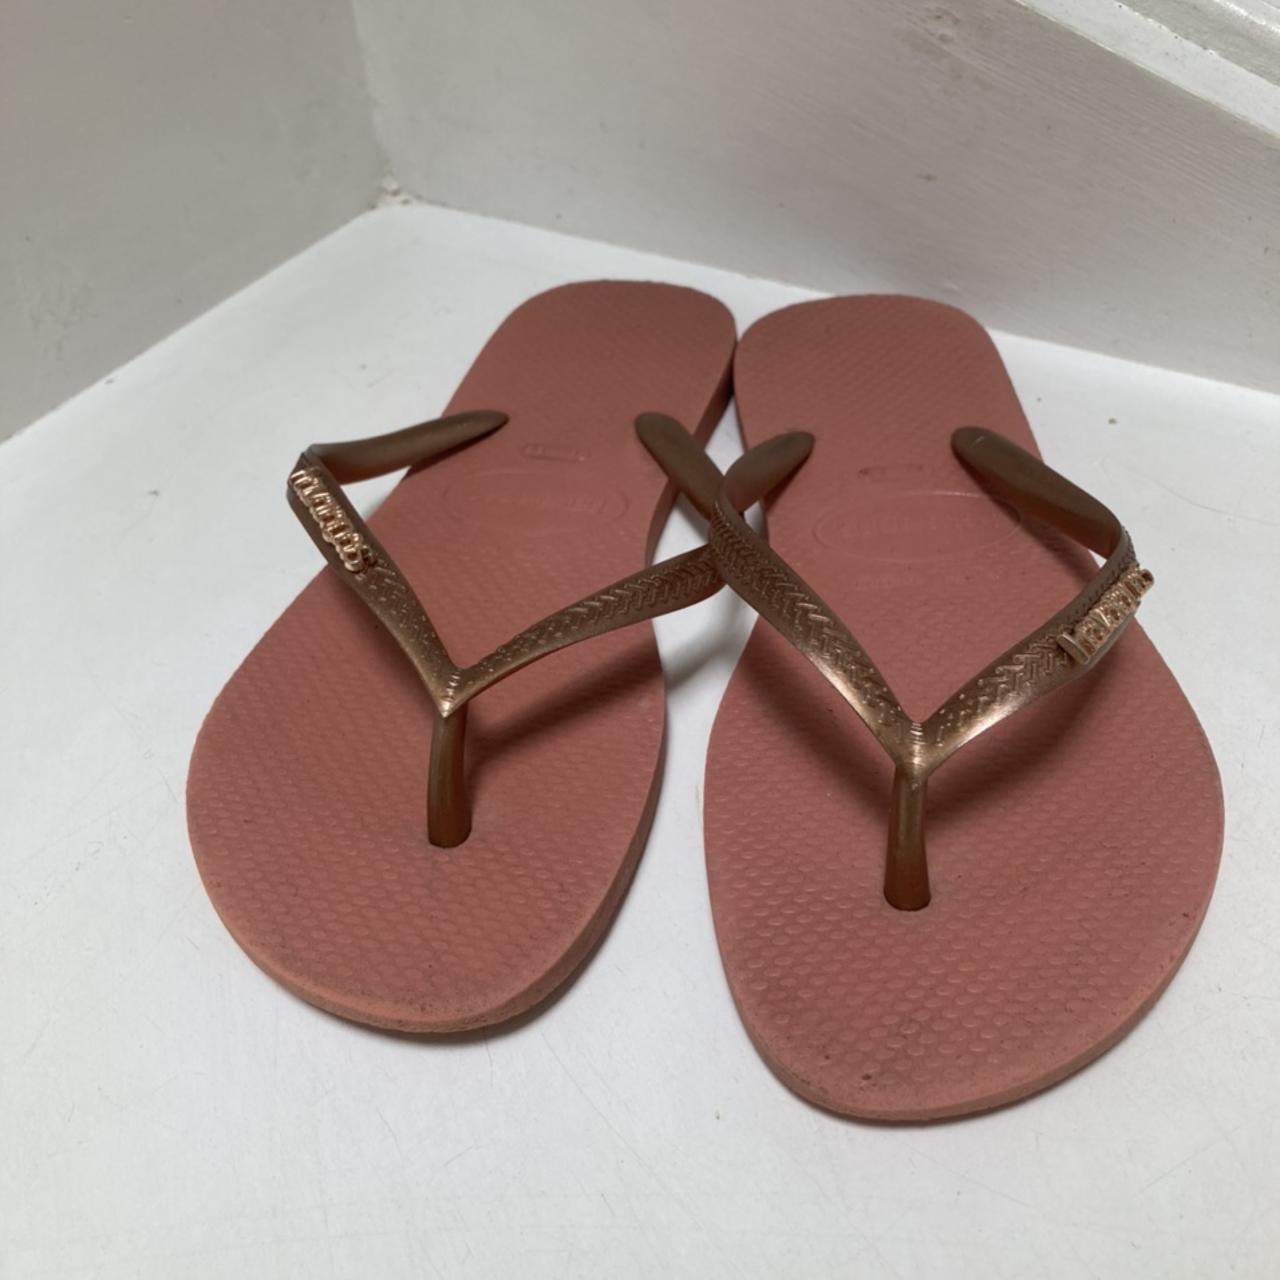 Havaianas Women's Pink and Gold Sandals